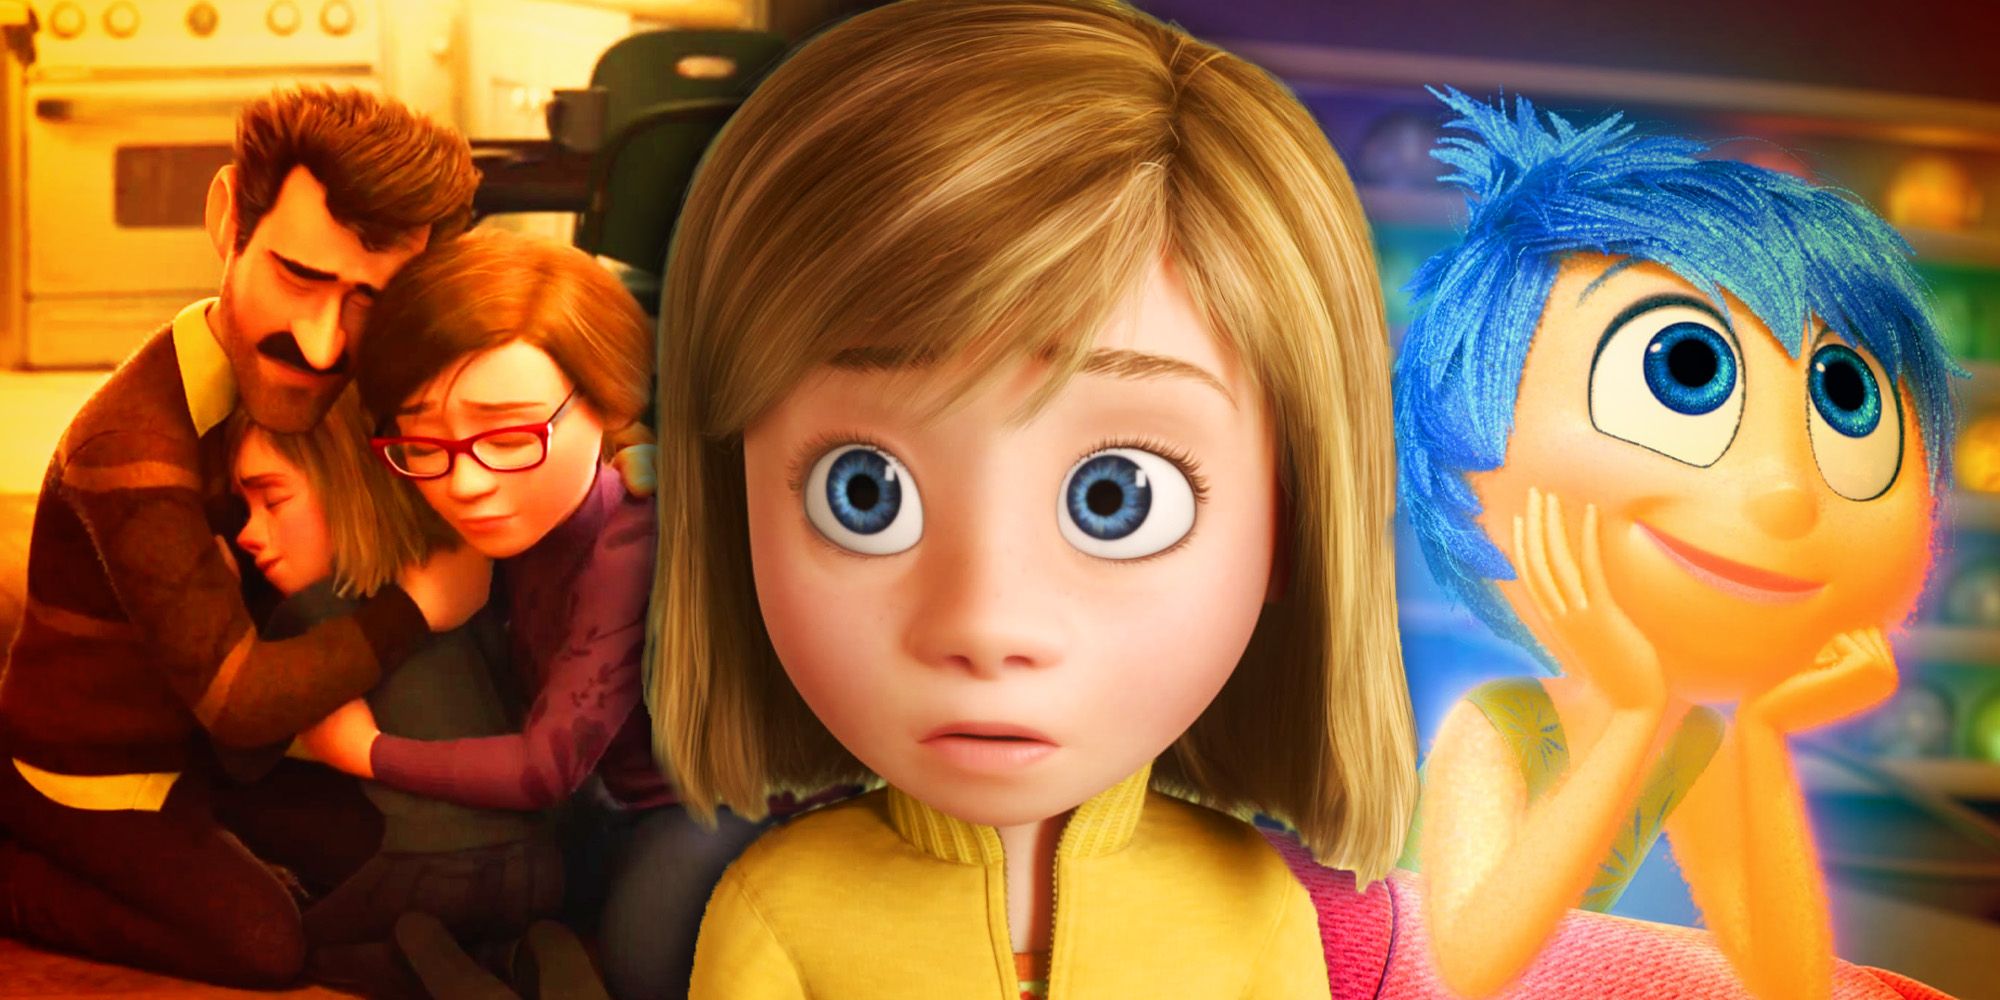 Inside Out Ending Explained: Sadness, Anger & Well-Balanced Emotions